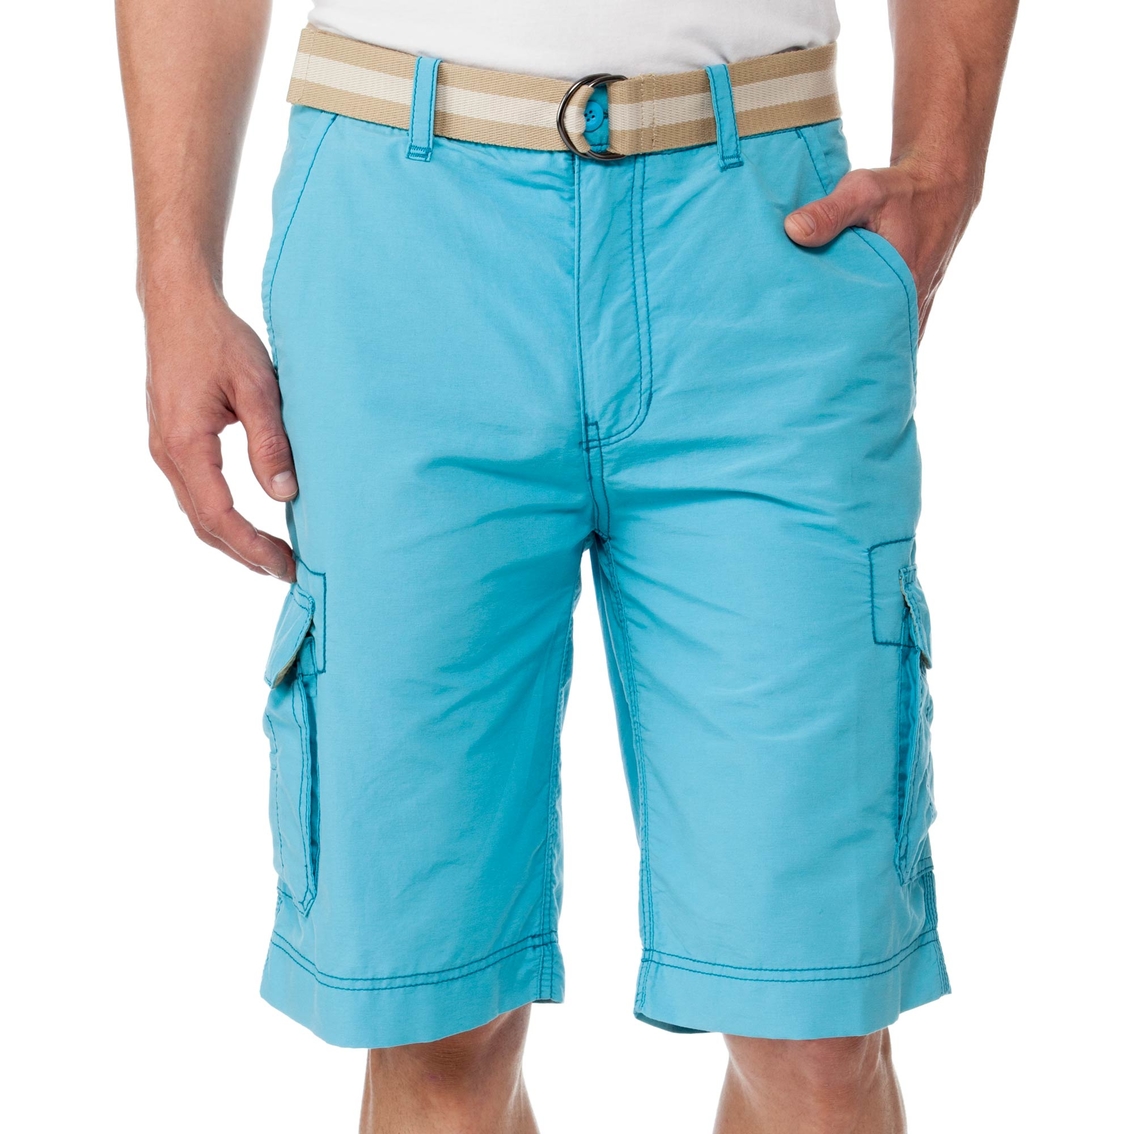 Wearfirst Belted Cotton Nylon Cargo Shorts | Shorts | Apparel | Shop ...